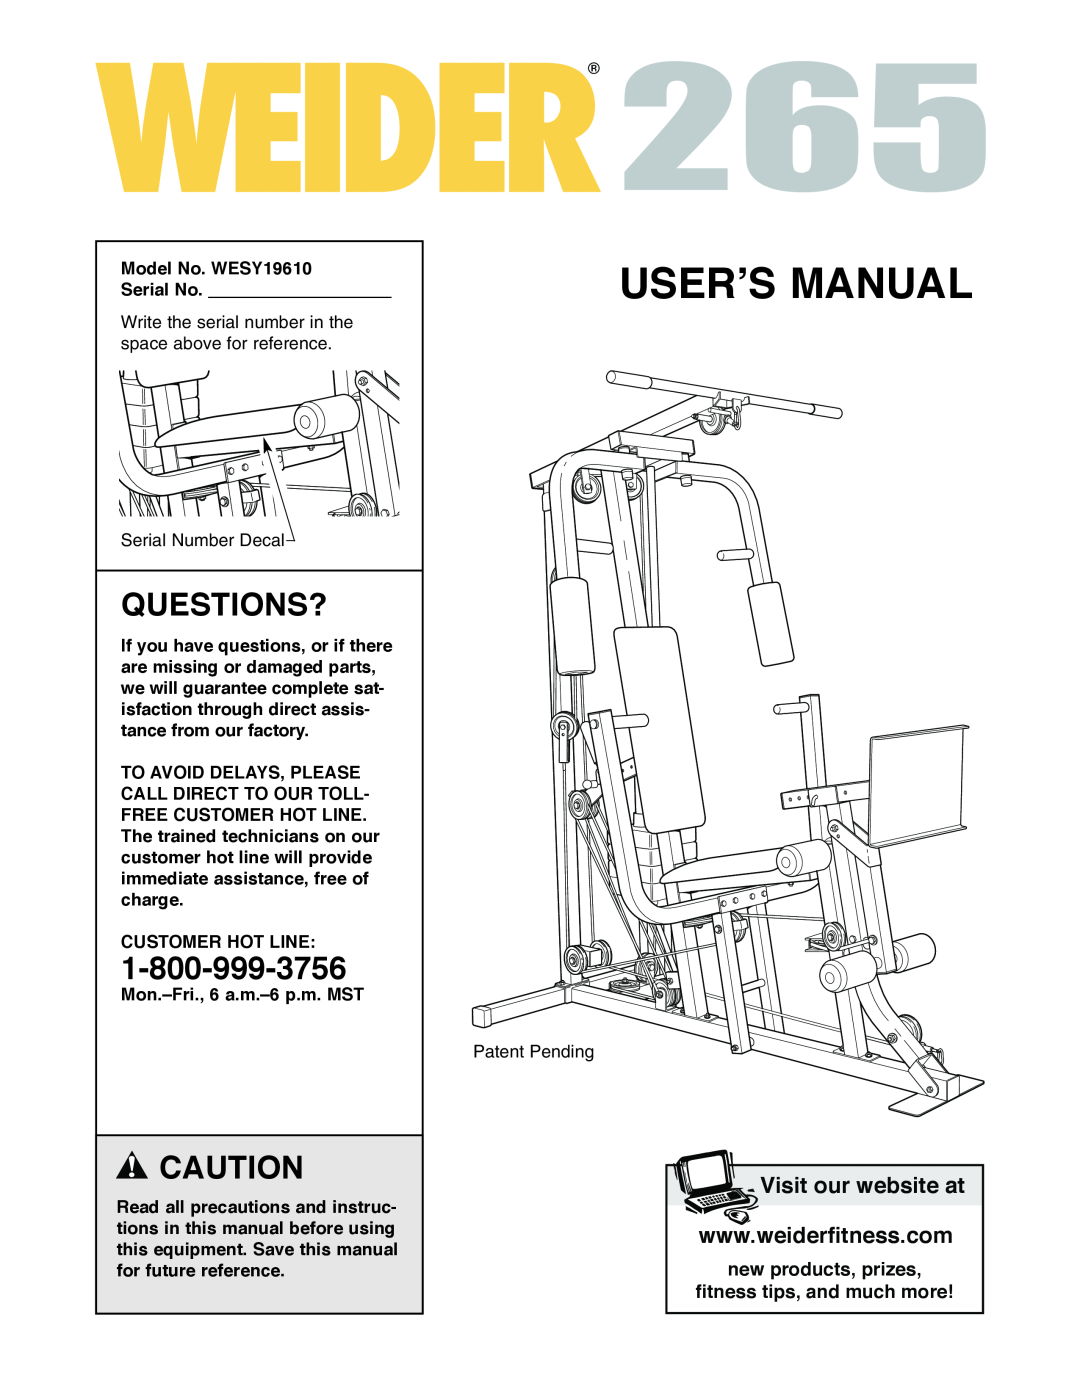 Weider WESY19610 user manual Questions?, User’S Manual, Visit our website at 